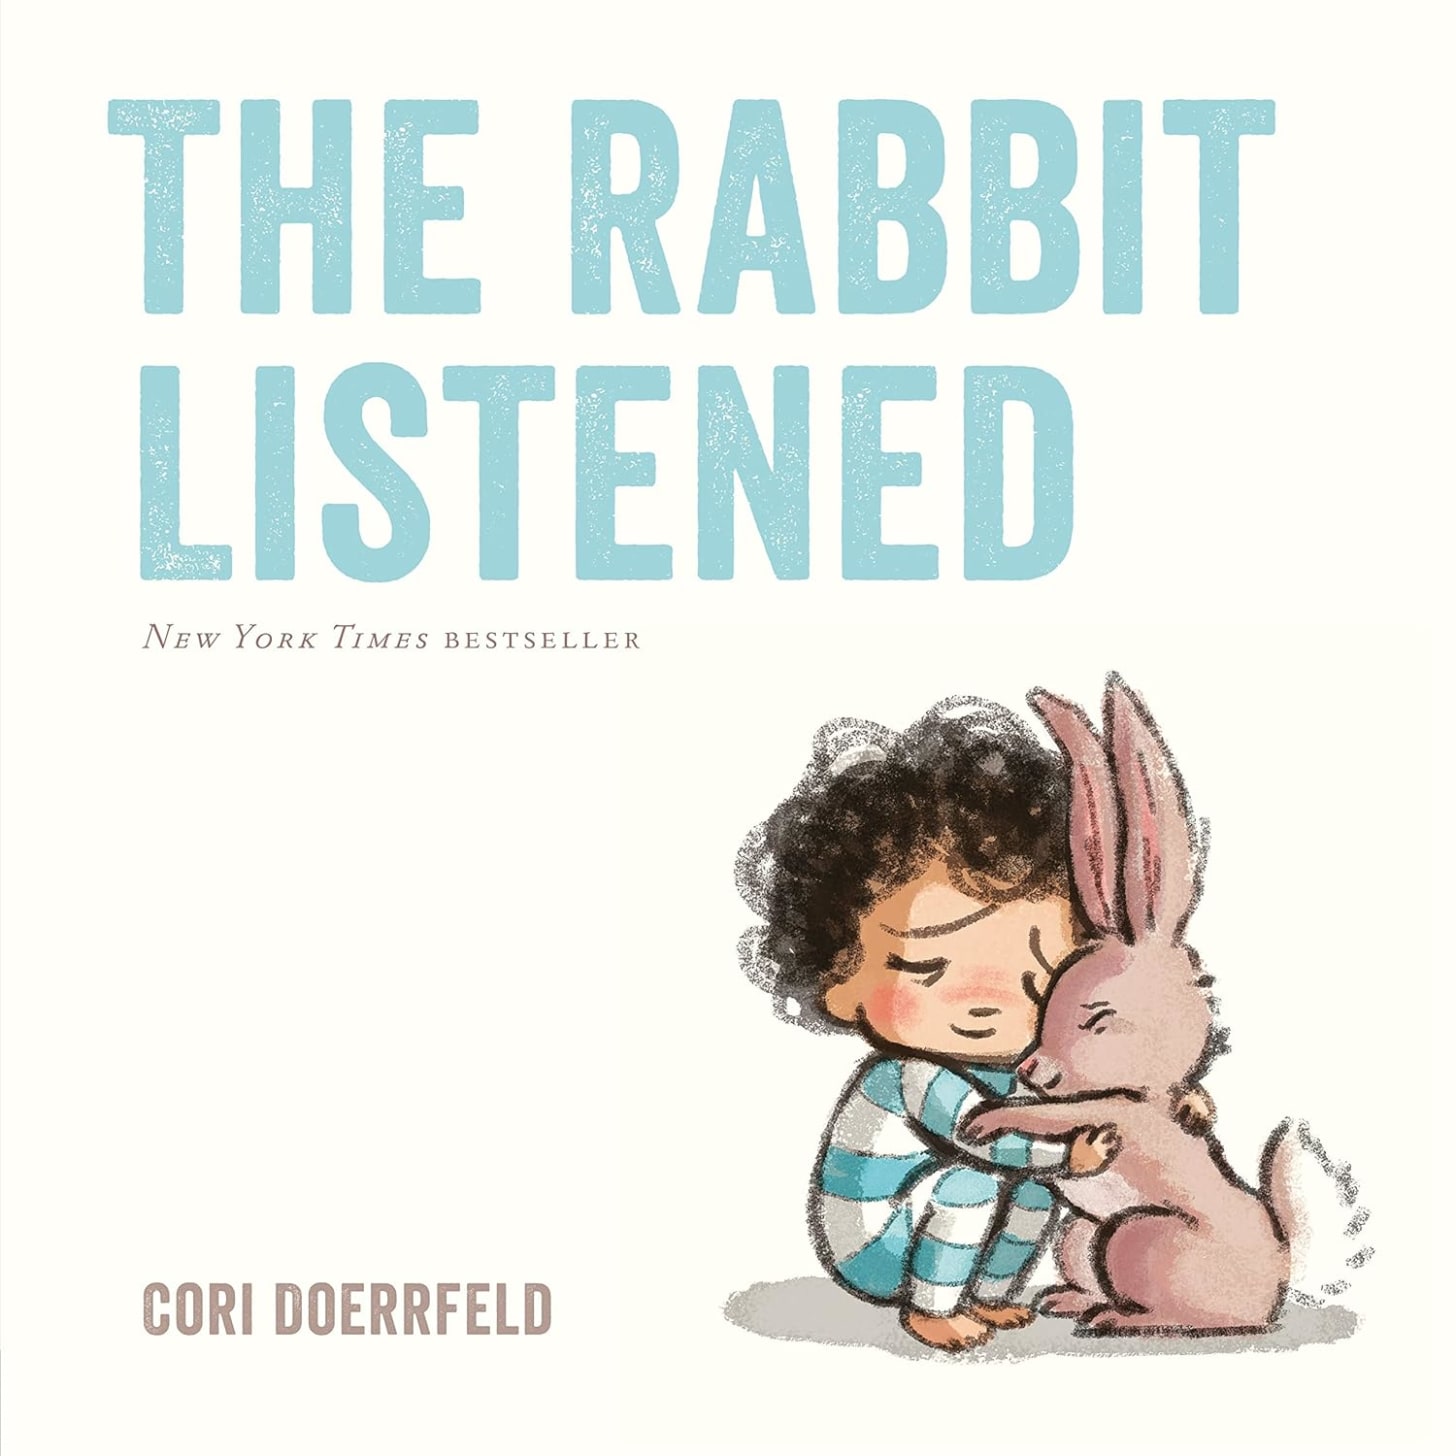 The cover image of the picture book The Rabbit Listened, showing a young child in an embrace with a rabbit against a white background.